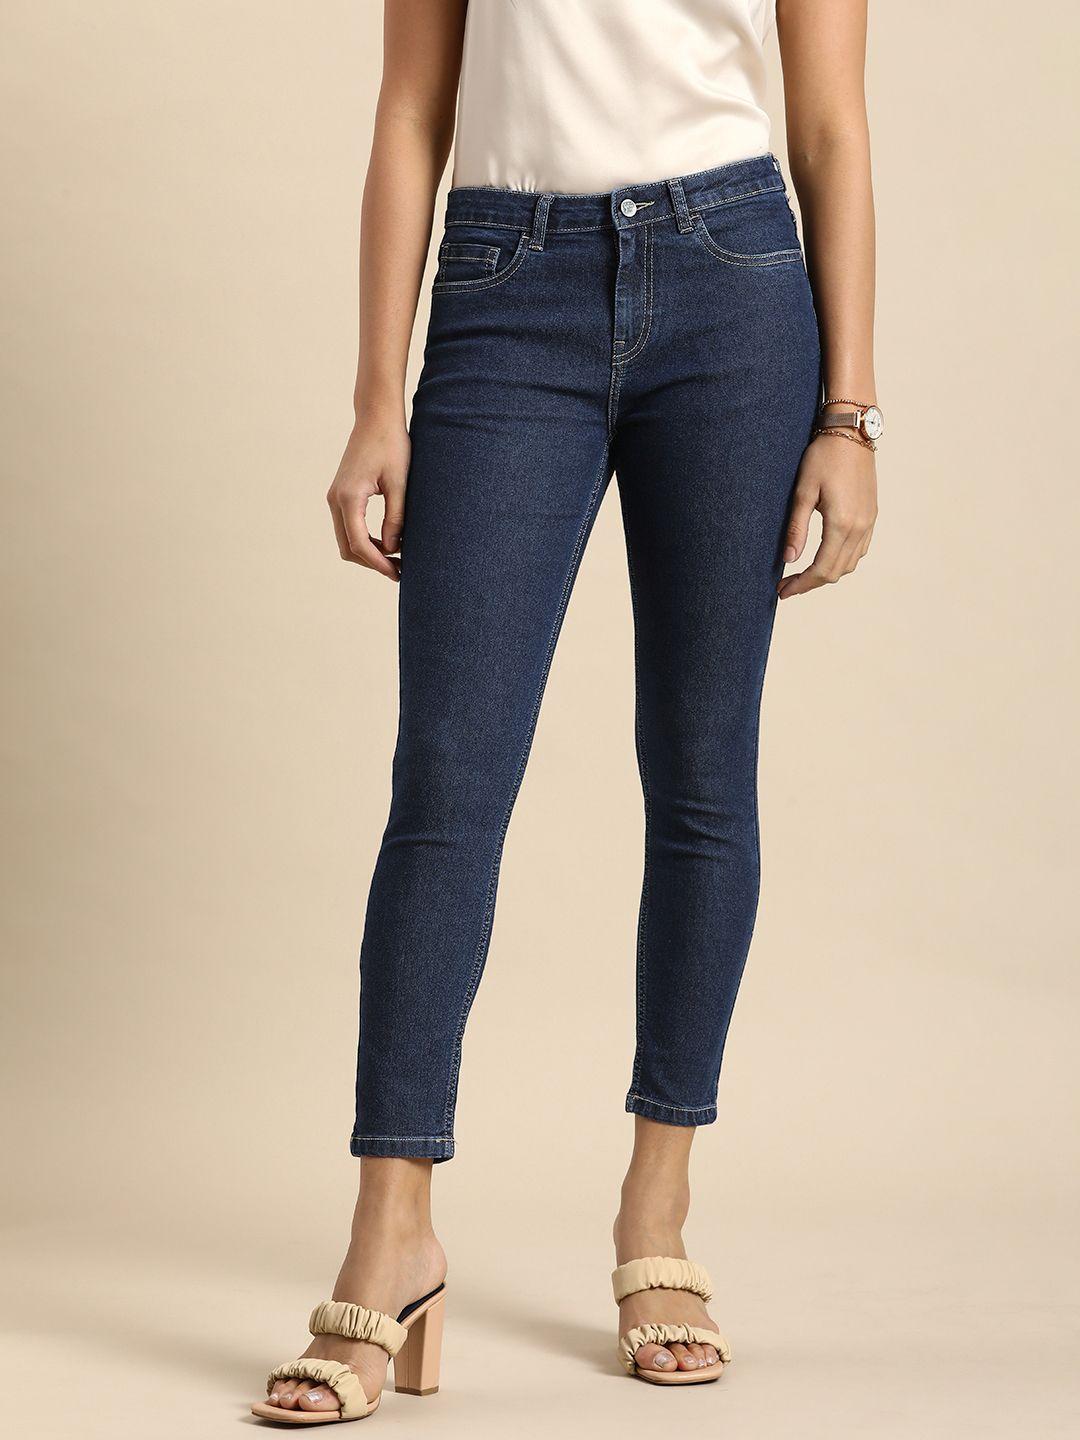 all-about-you-women-mid-rise-skinny-fit-stretchable-jeans